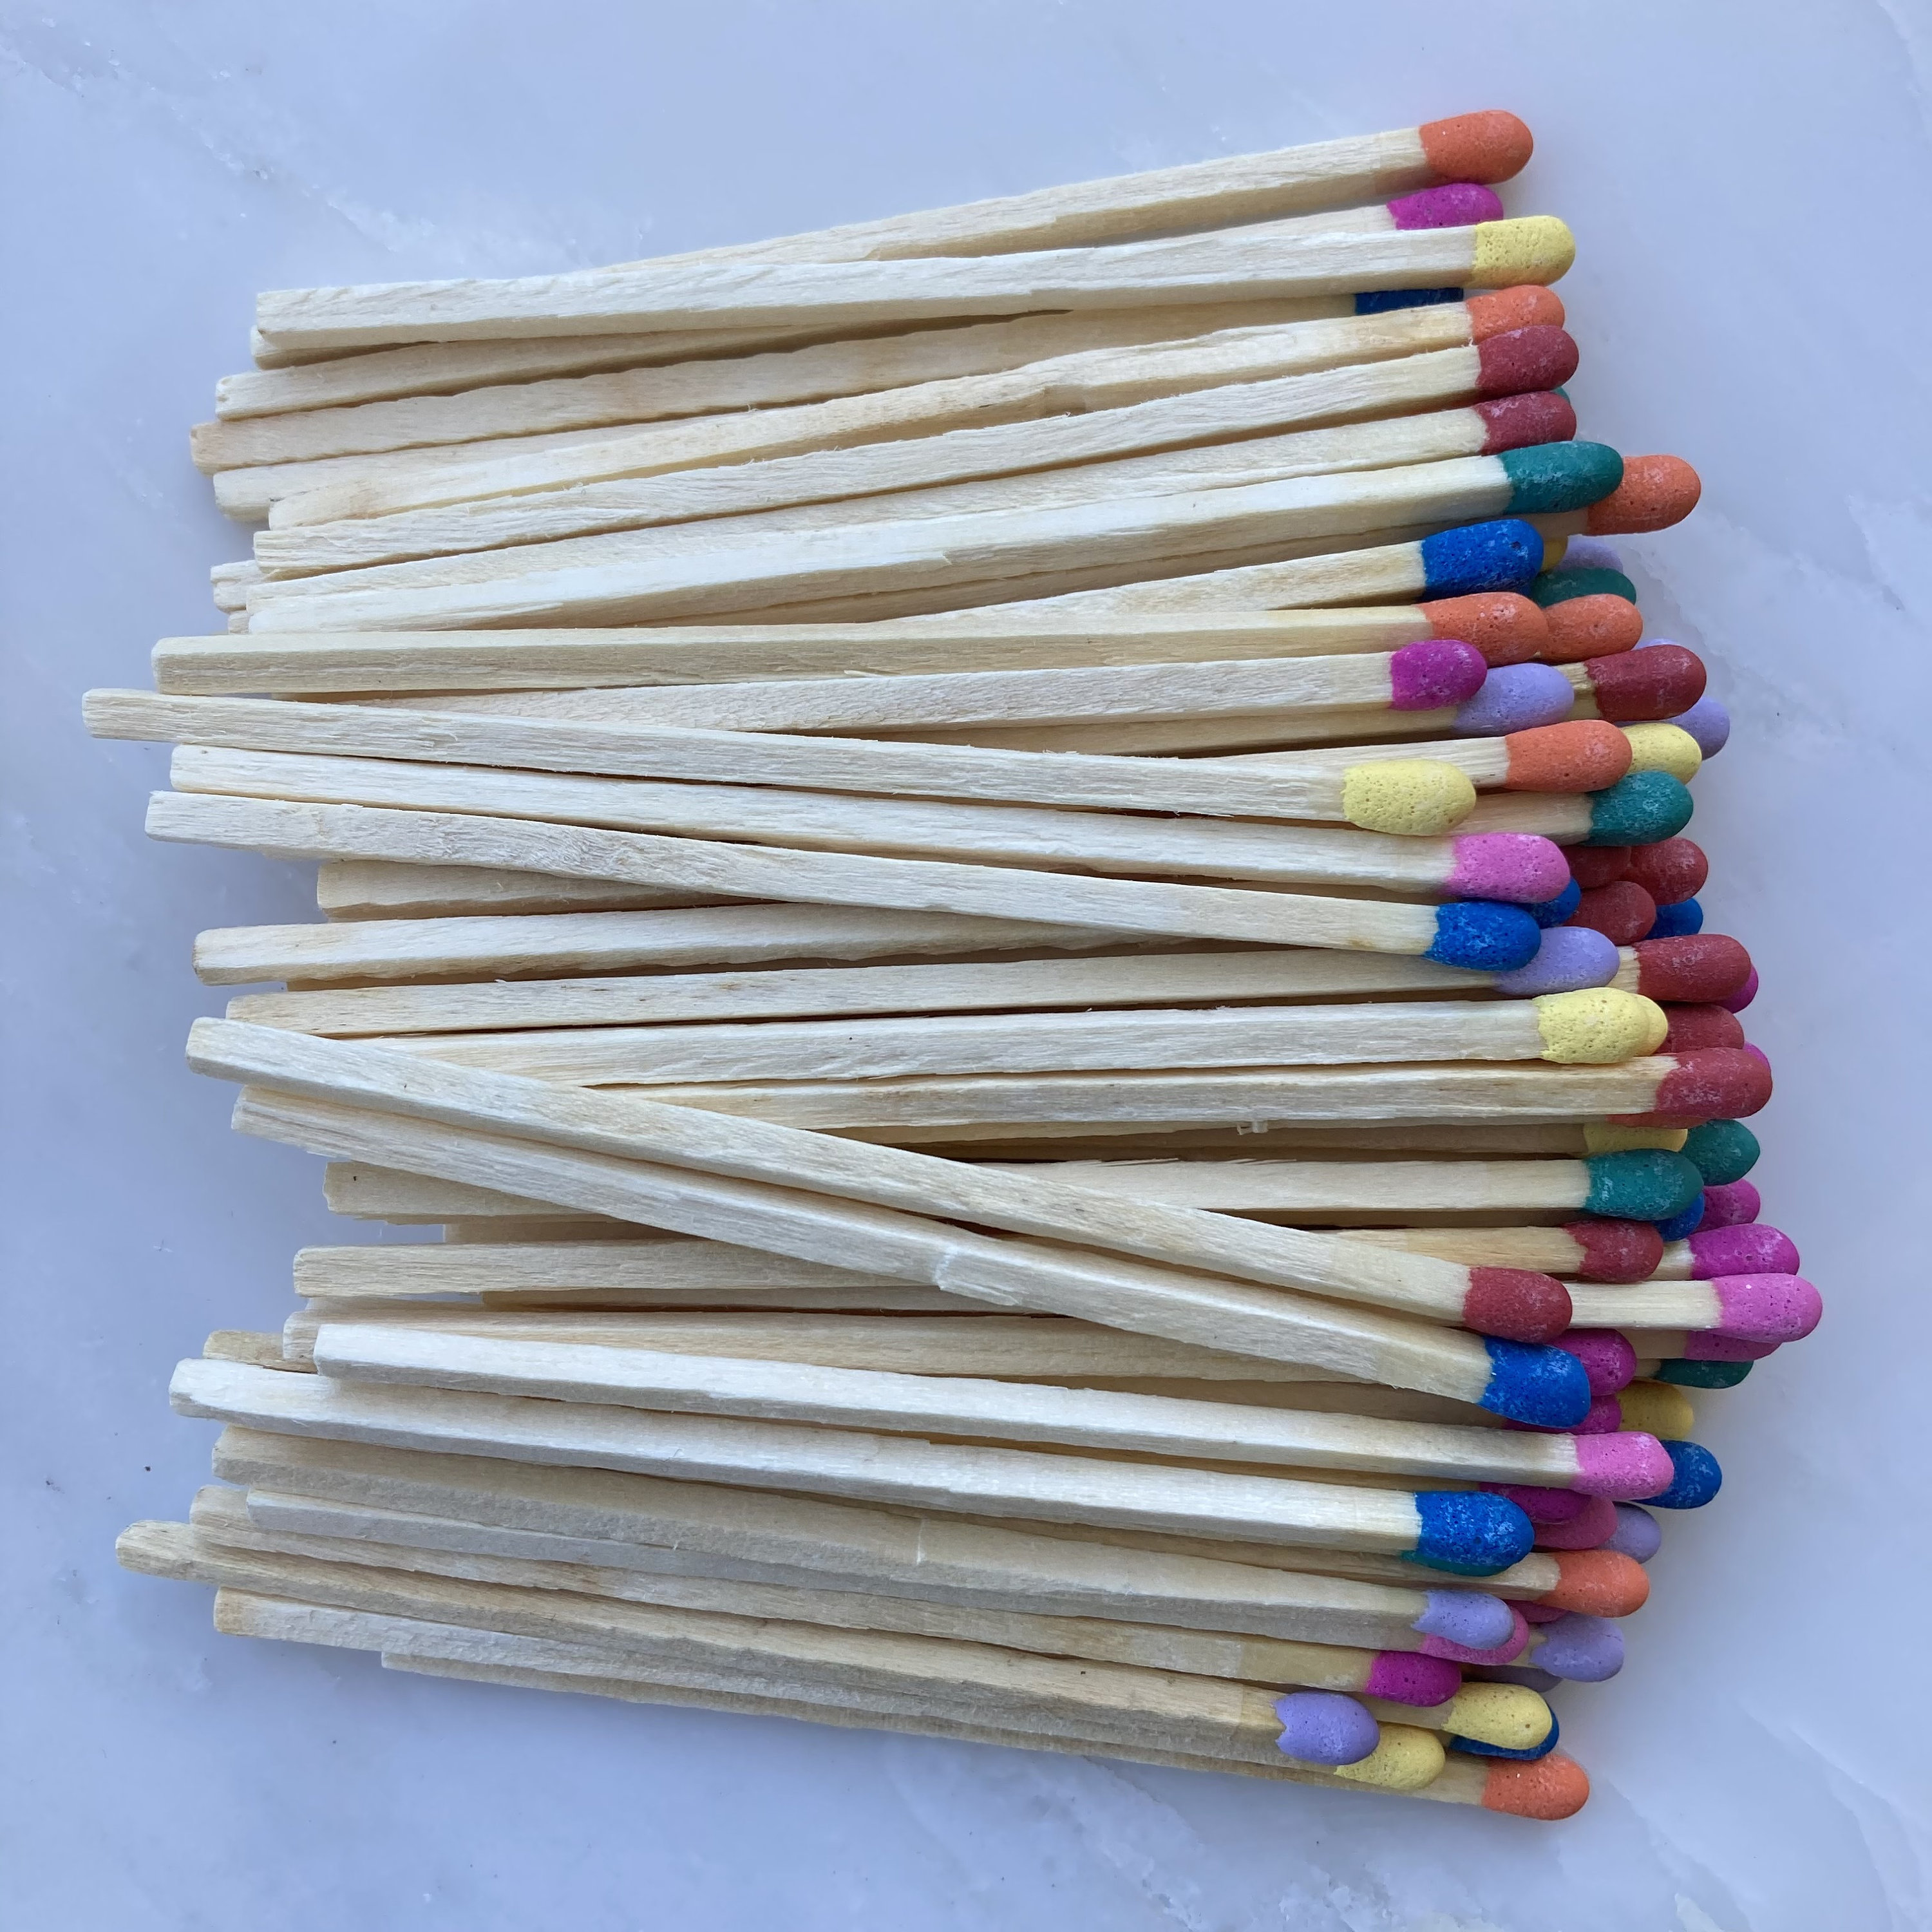 Colored Tip Matches, Colorful Matchsticks, 25 pc Refill Bundle